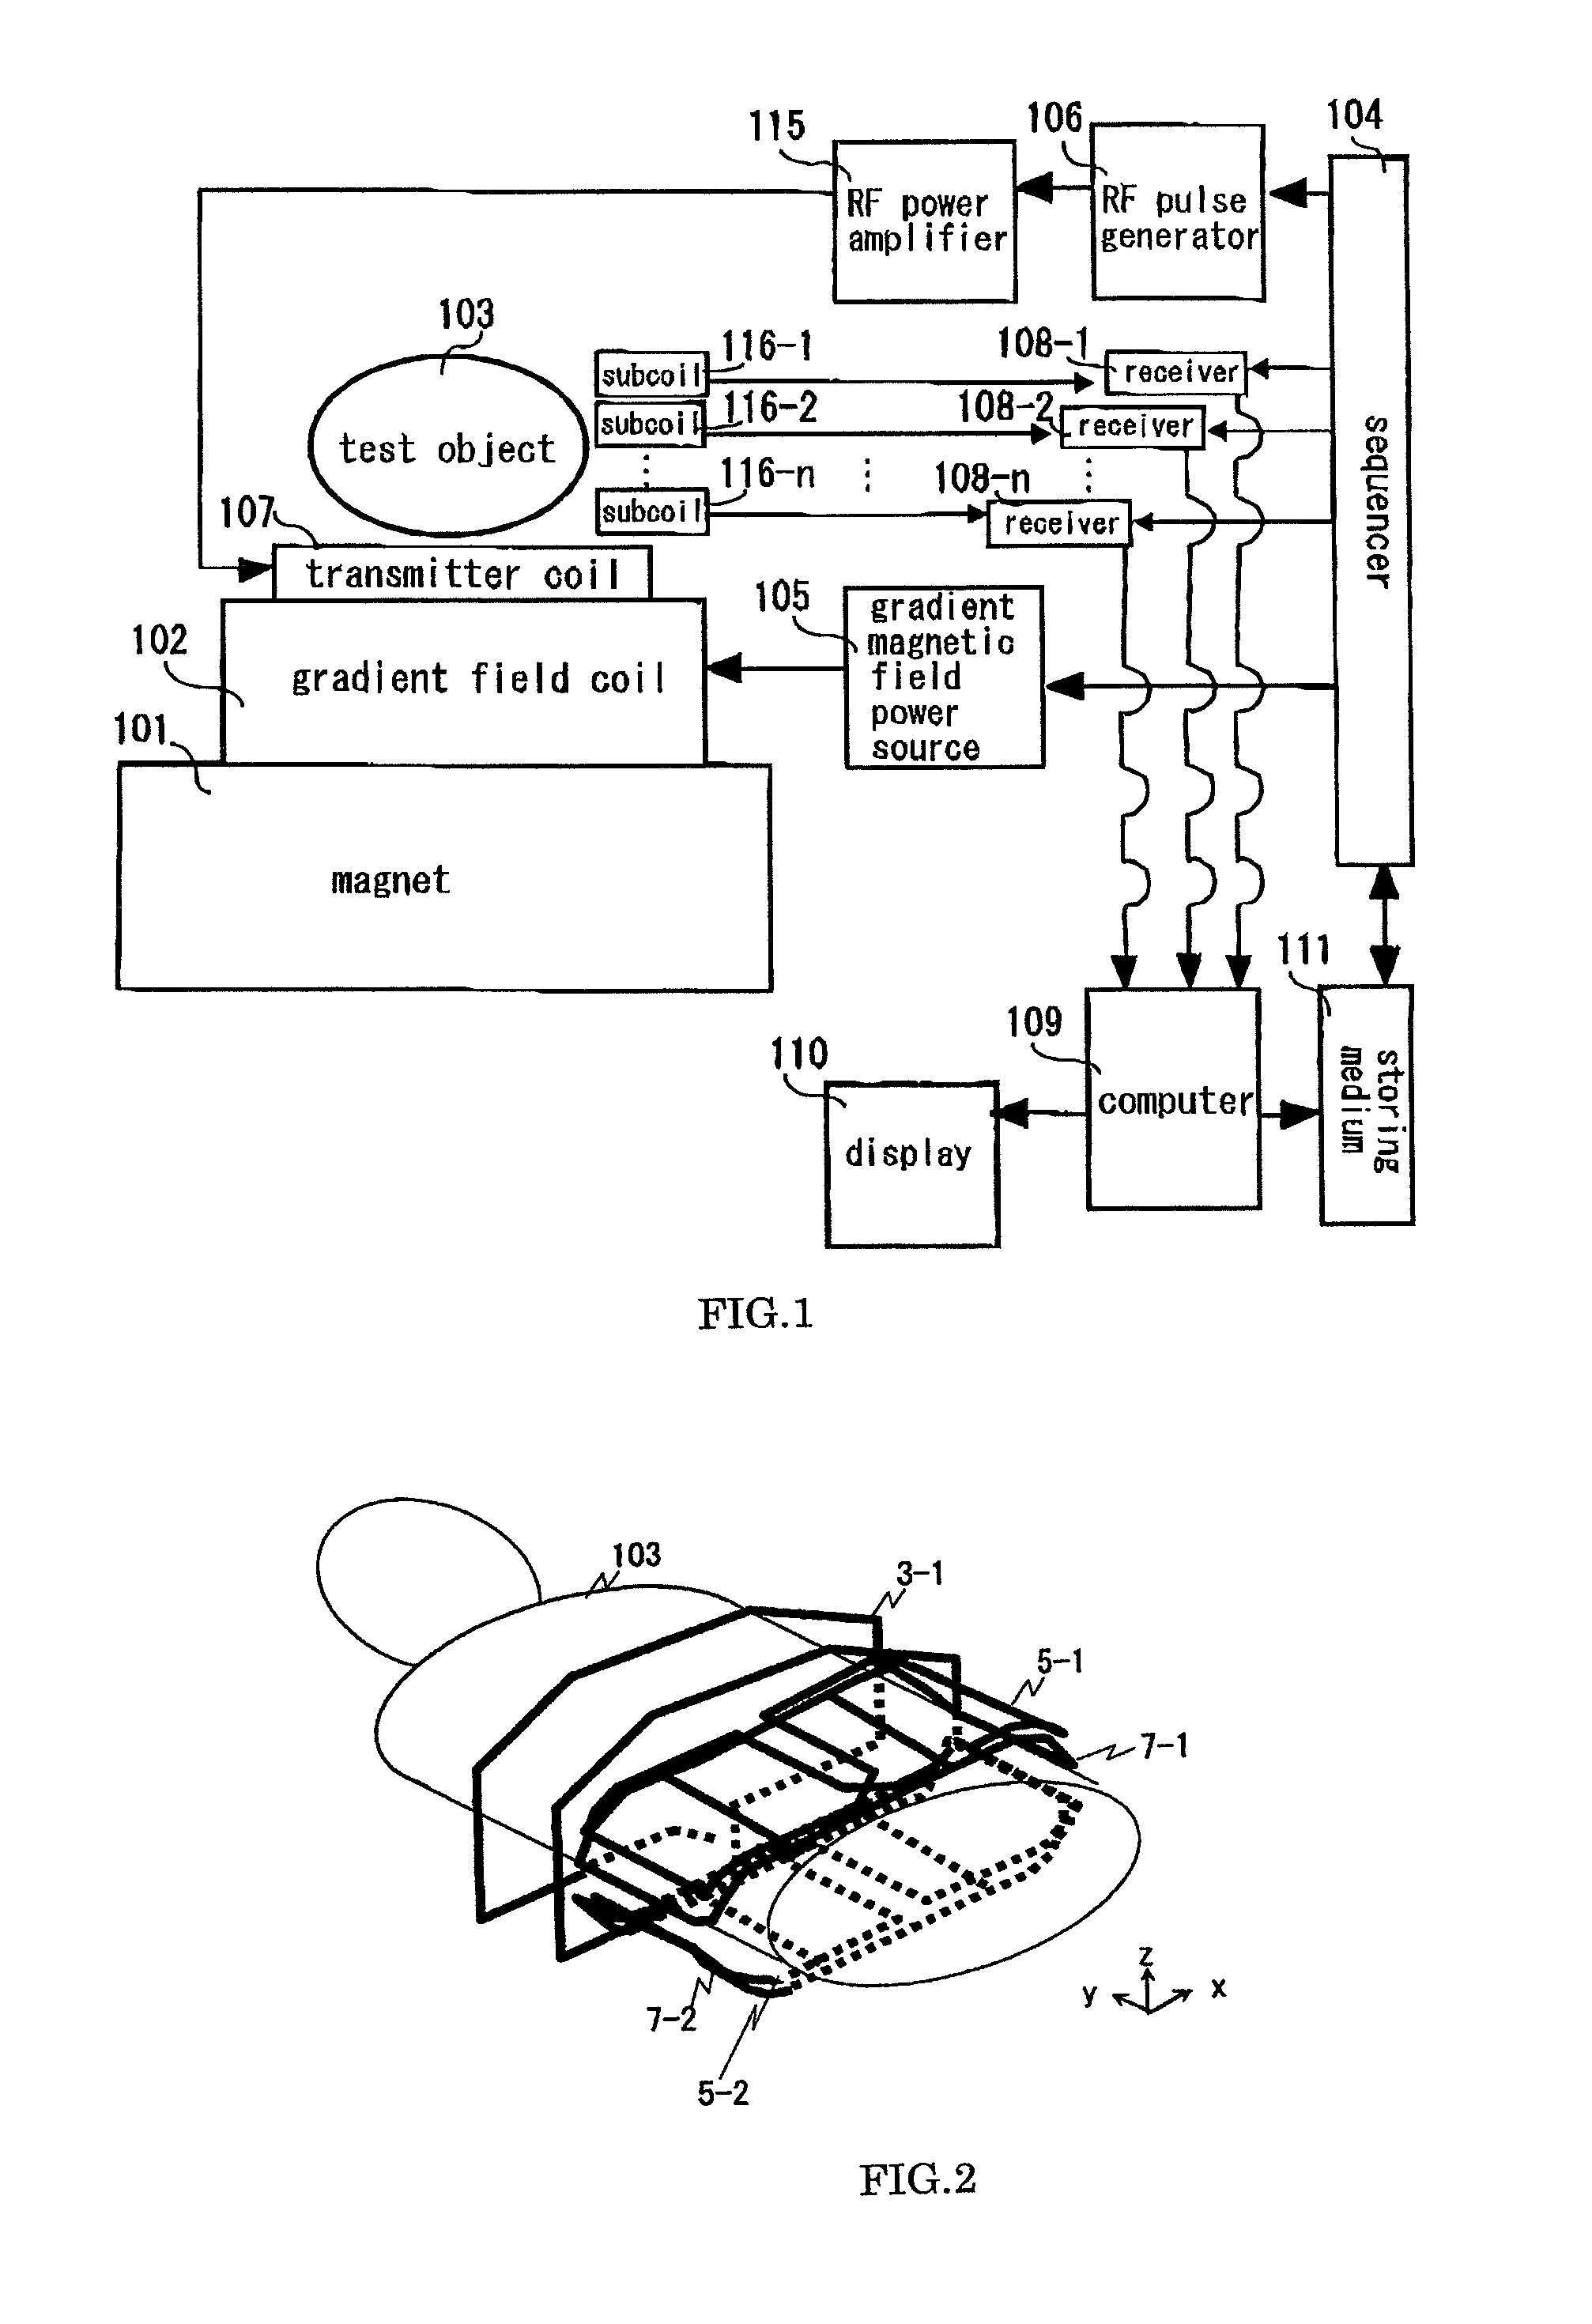 Inspection apparatus using magnetic resonance and nuclear magnetic resonance signal receiver coil